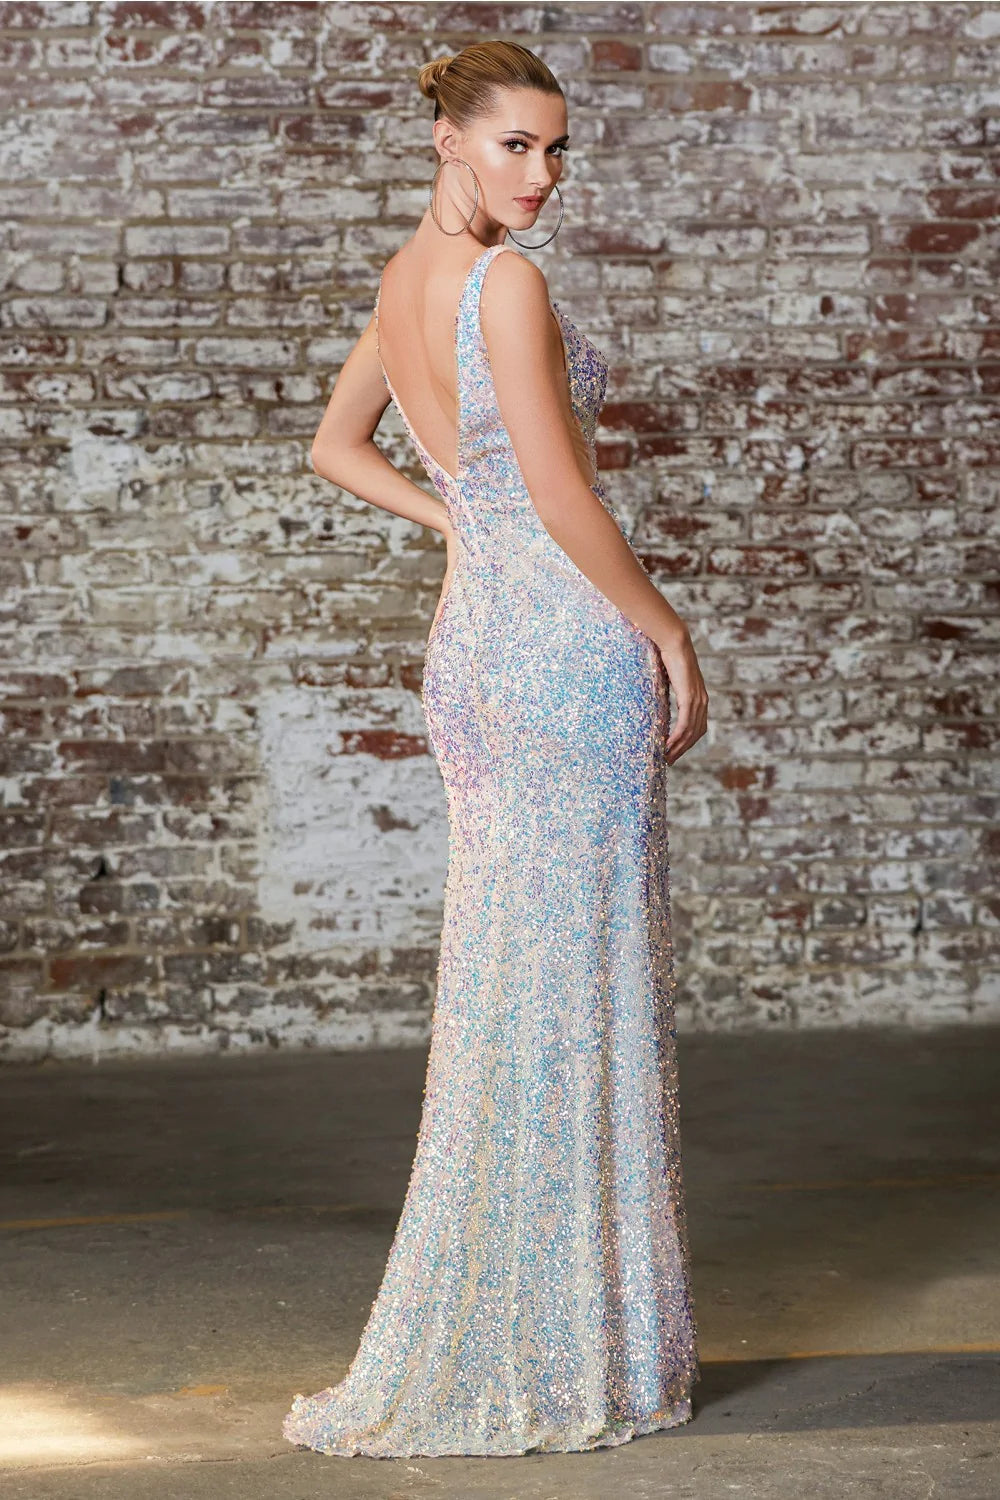 CD 187 Size 6 Long Fitted Sequin Prom Dress with a high Slit. This Formal Gown ha a V Neckline sheer cutout mesh side panels for a comfortable wear. This Pageant dress is major WOW factor!  Sizes: 6  Colors: Opal Blush